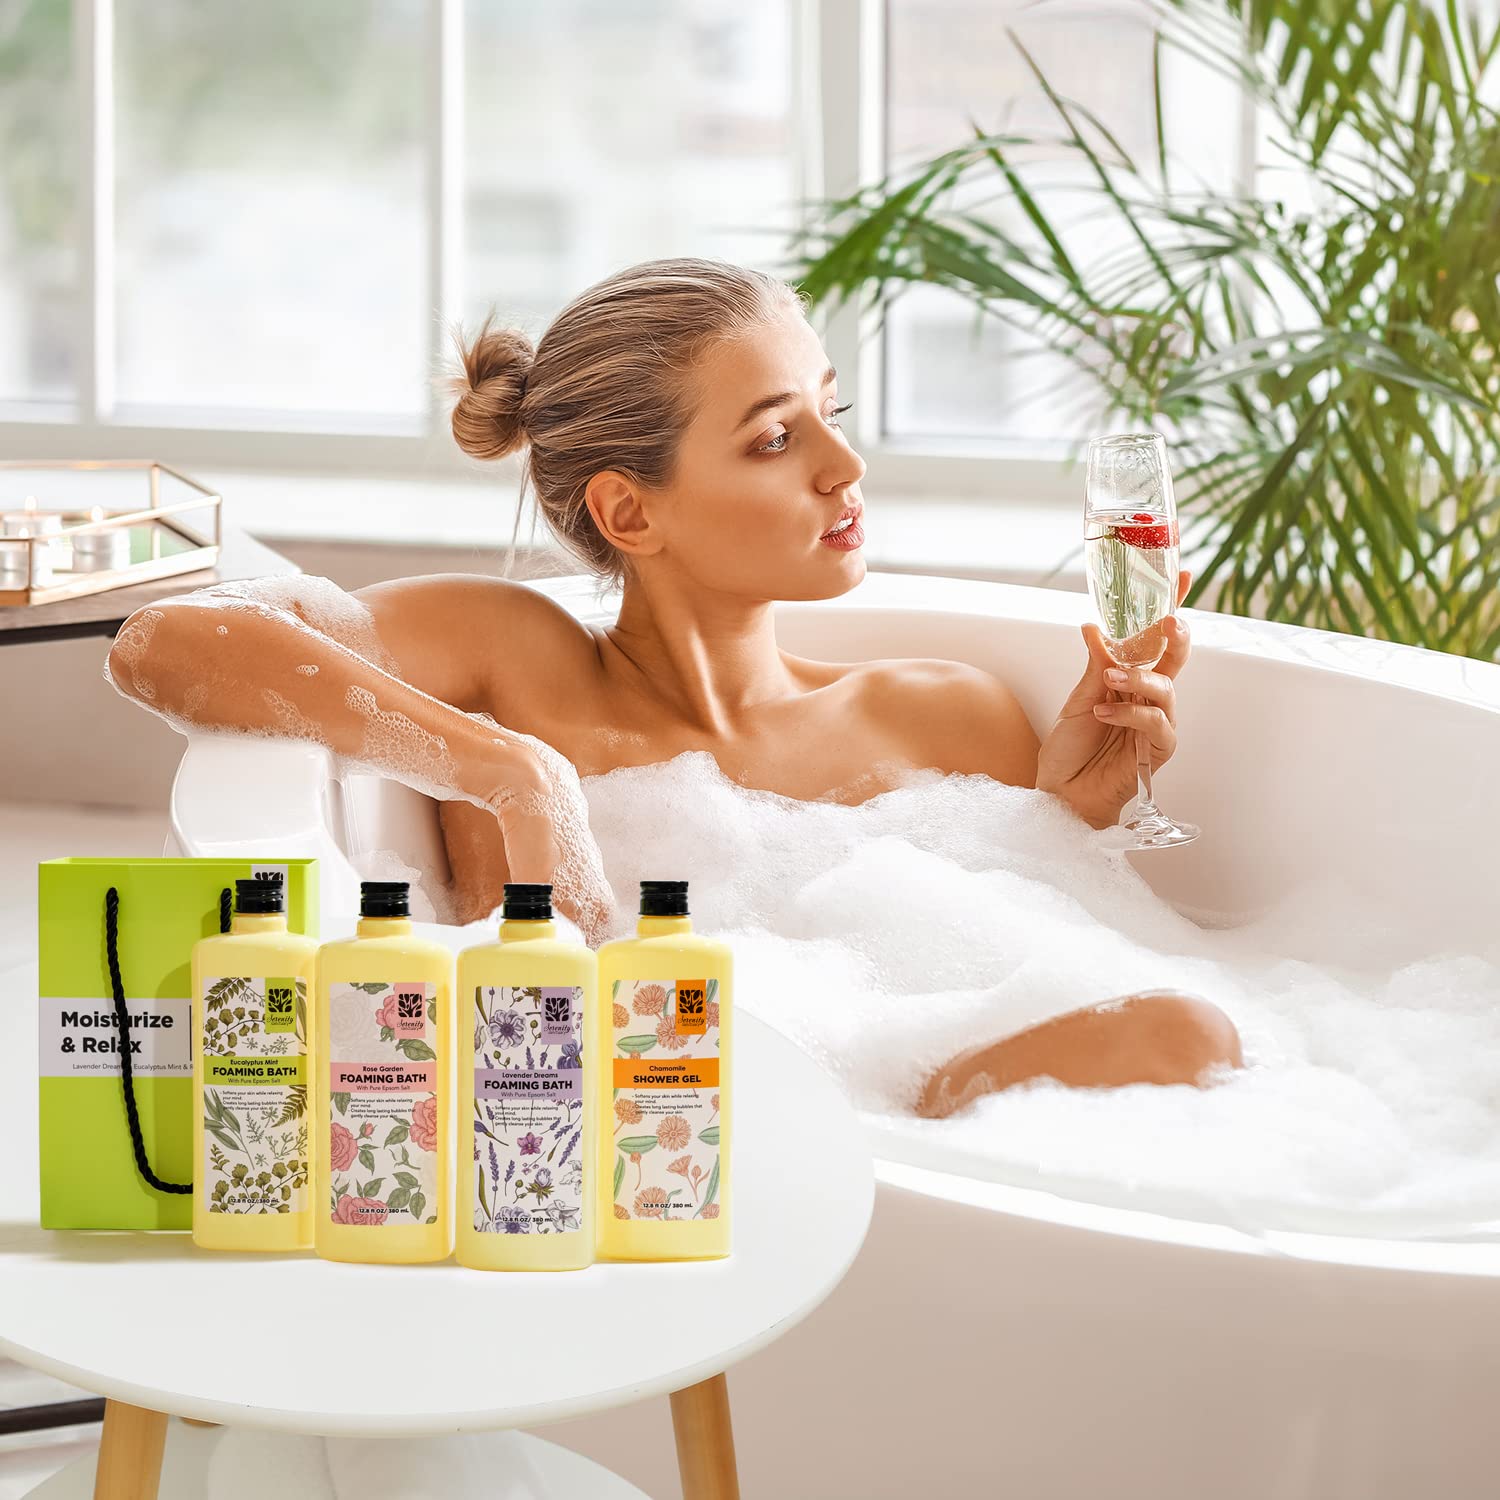 Bubble Bath for Women Adults, Scented Bubble Bath Spa Gift Set for Women Relaxing, 4 Pack Bubble Bath with Shower Gel, Ladies Foaming Bath Variety